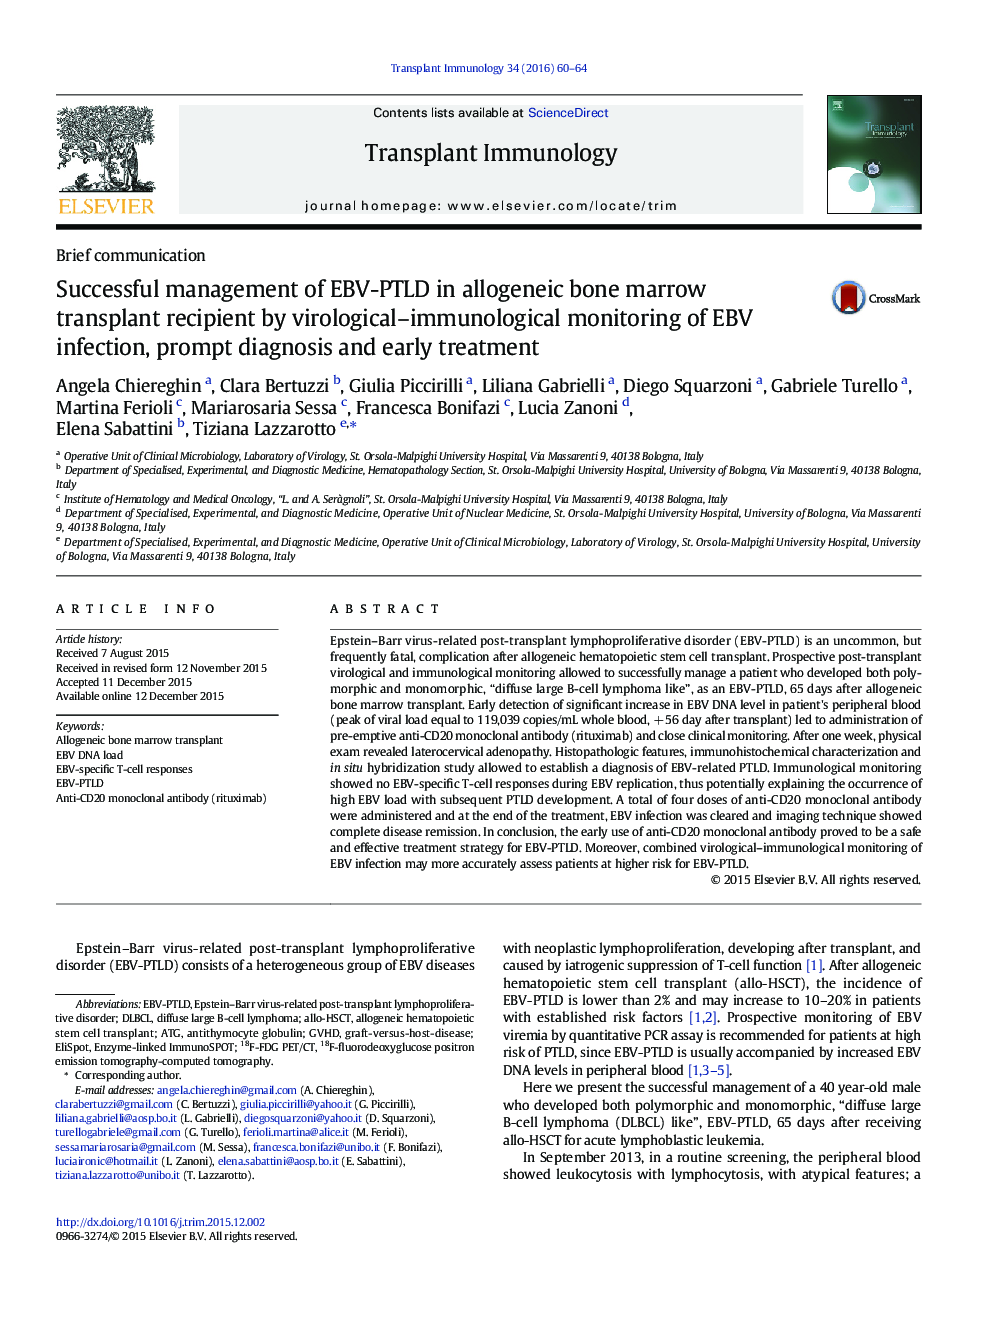 Successful management of EBV-PTLD in allogeneic bone marrow transplant recipient by virological–immunological monitoring of EBV infection, prompt diagnosis and early treatment